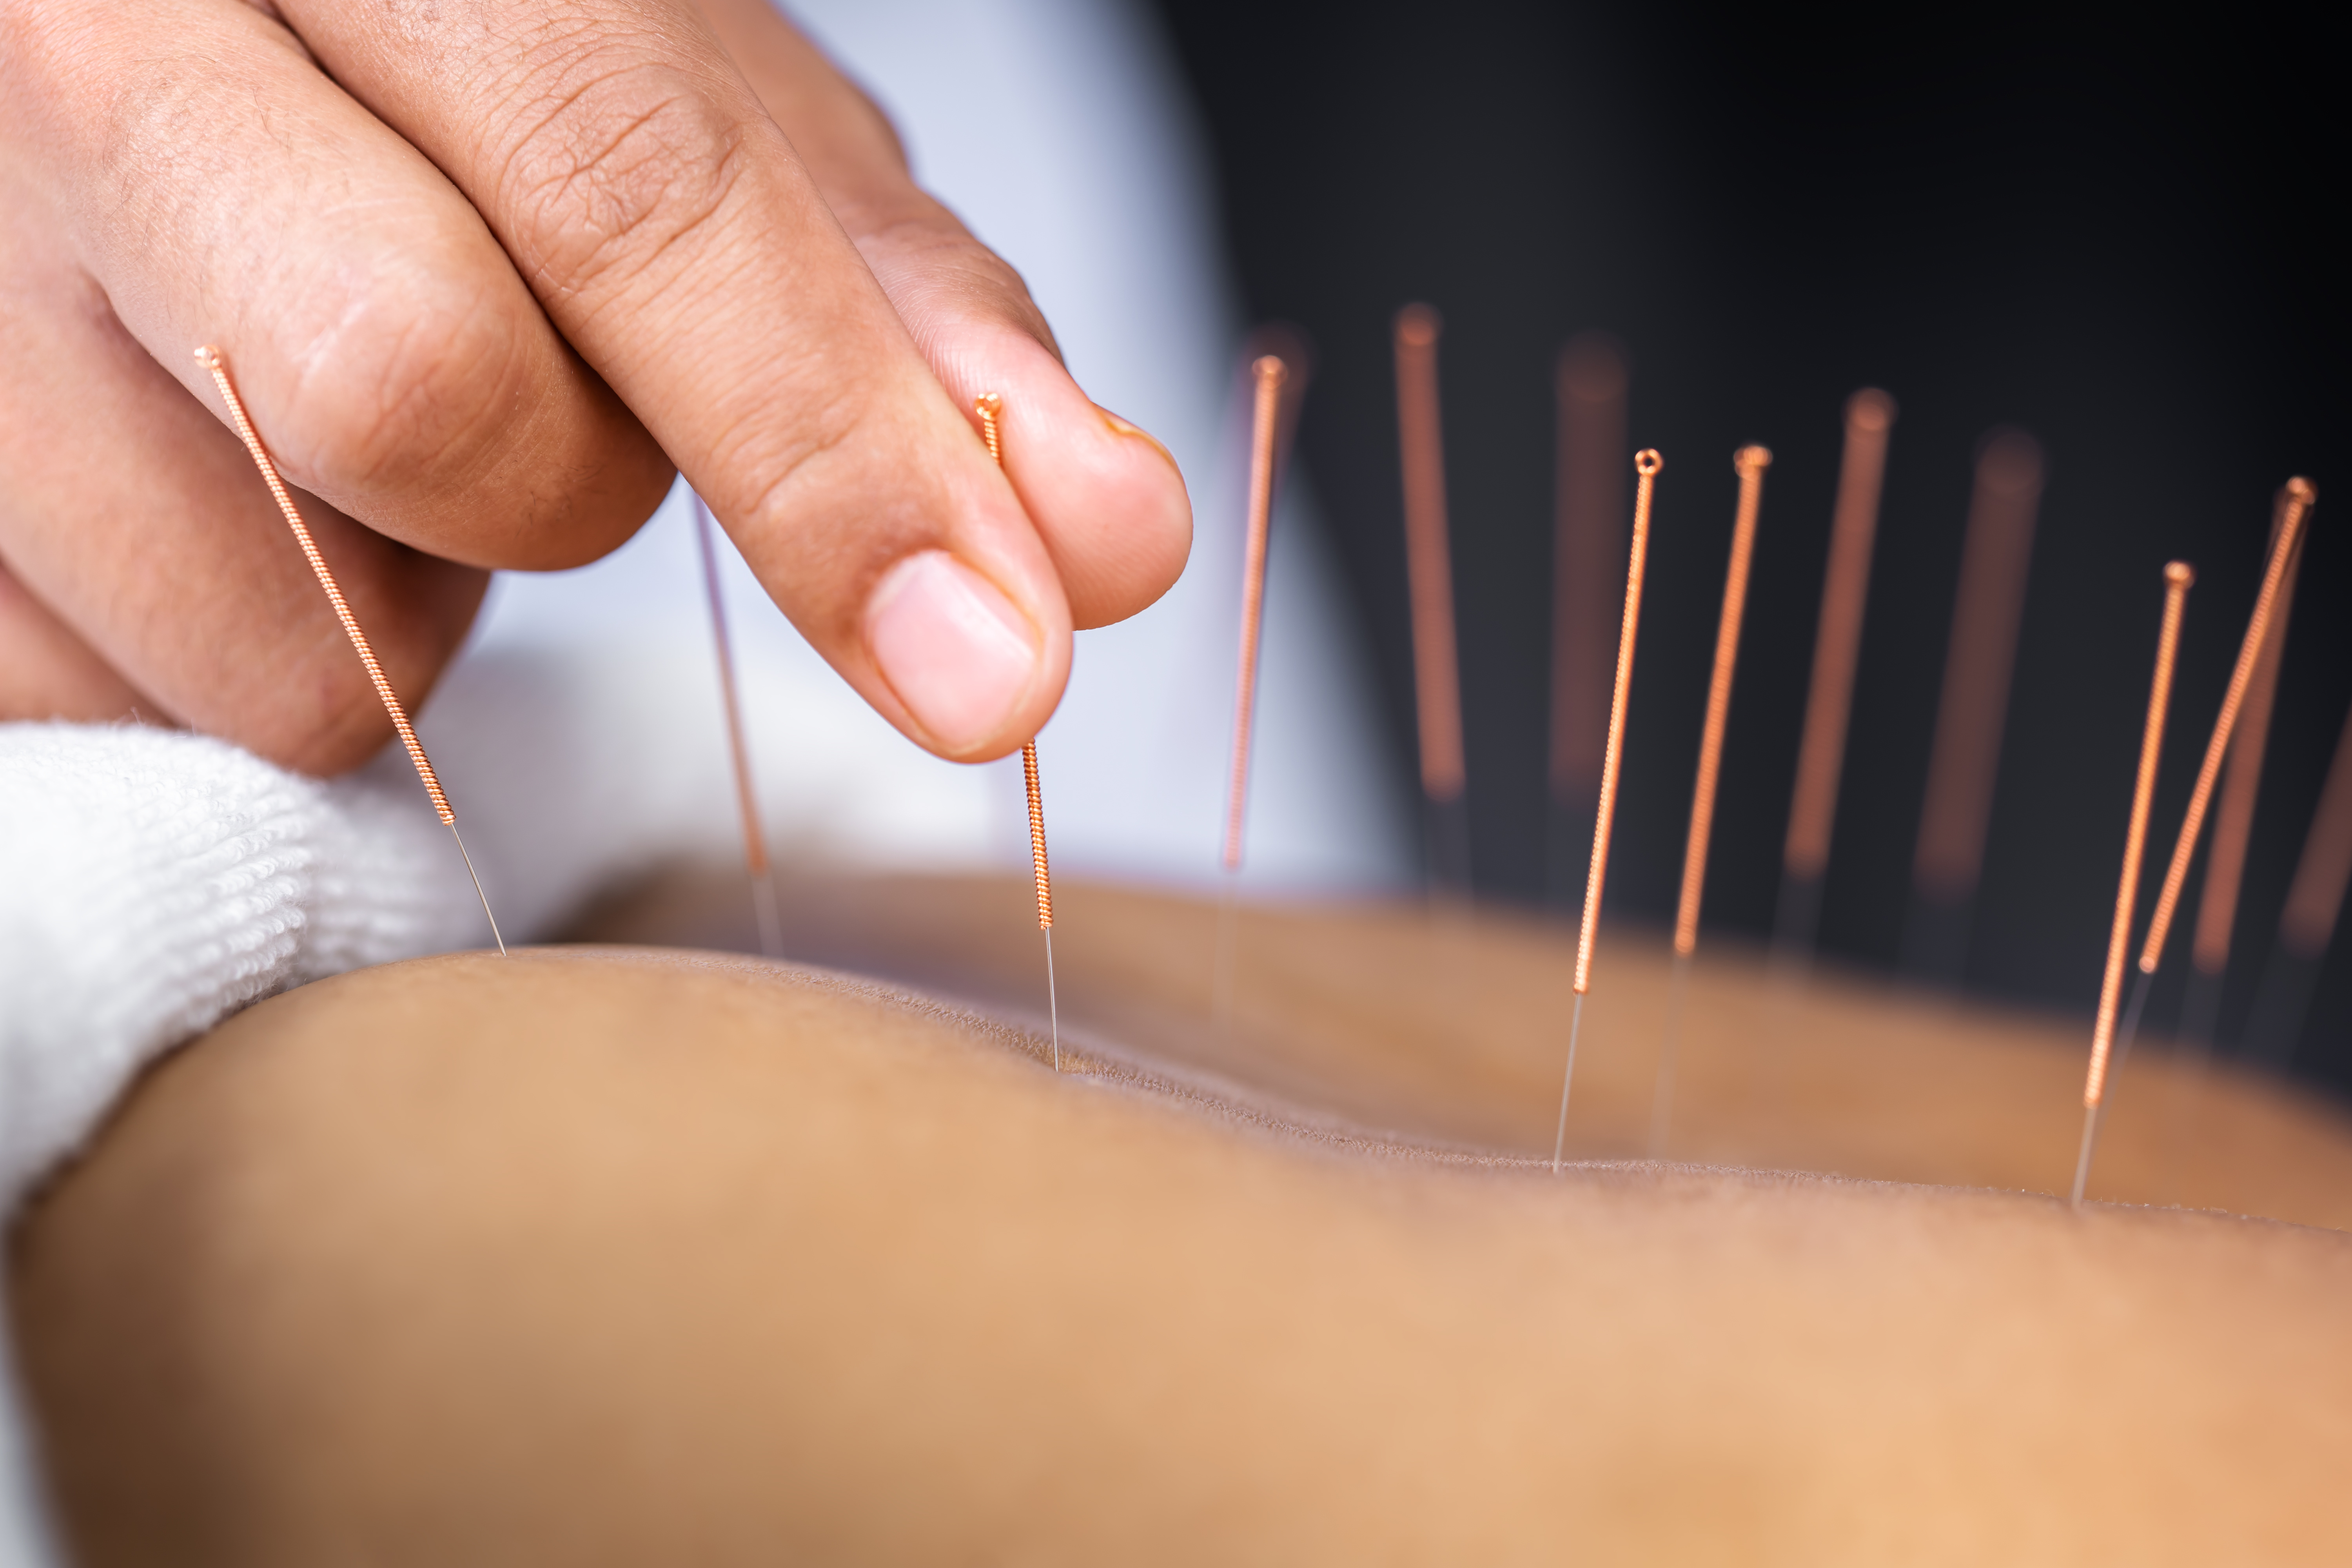 ACUPUNCTURE + MASSAGE THERAPY